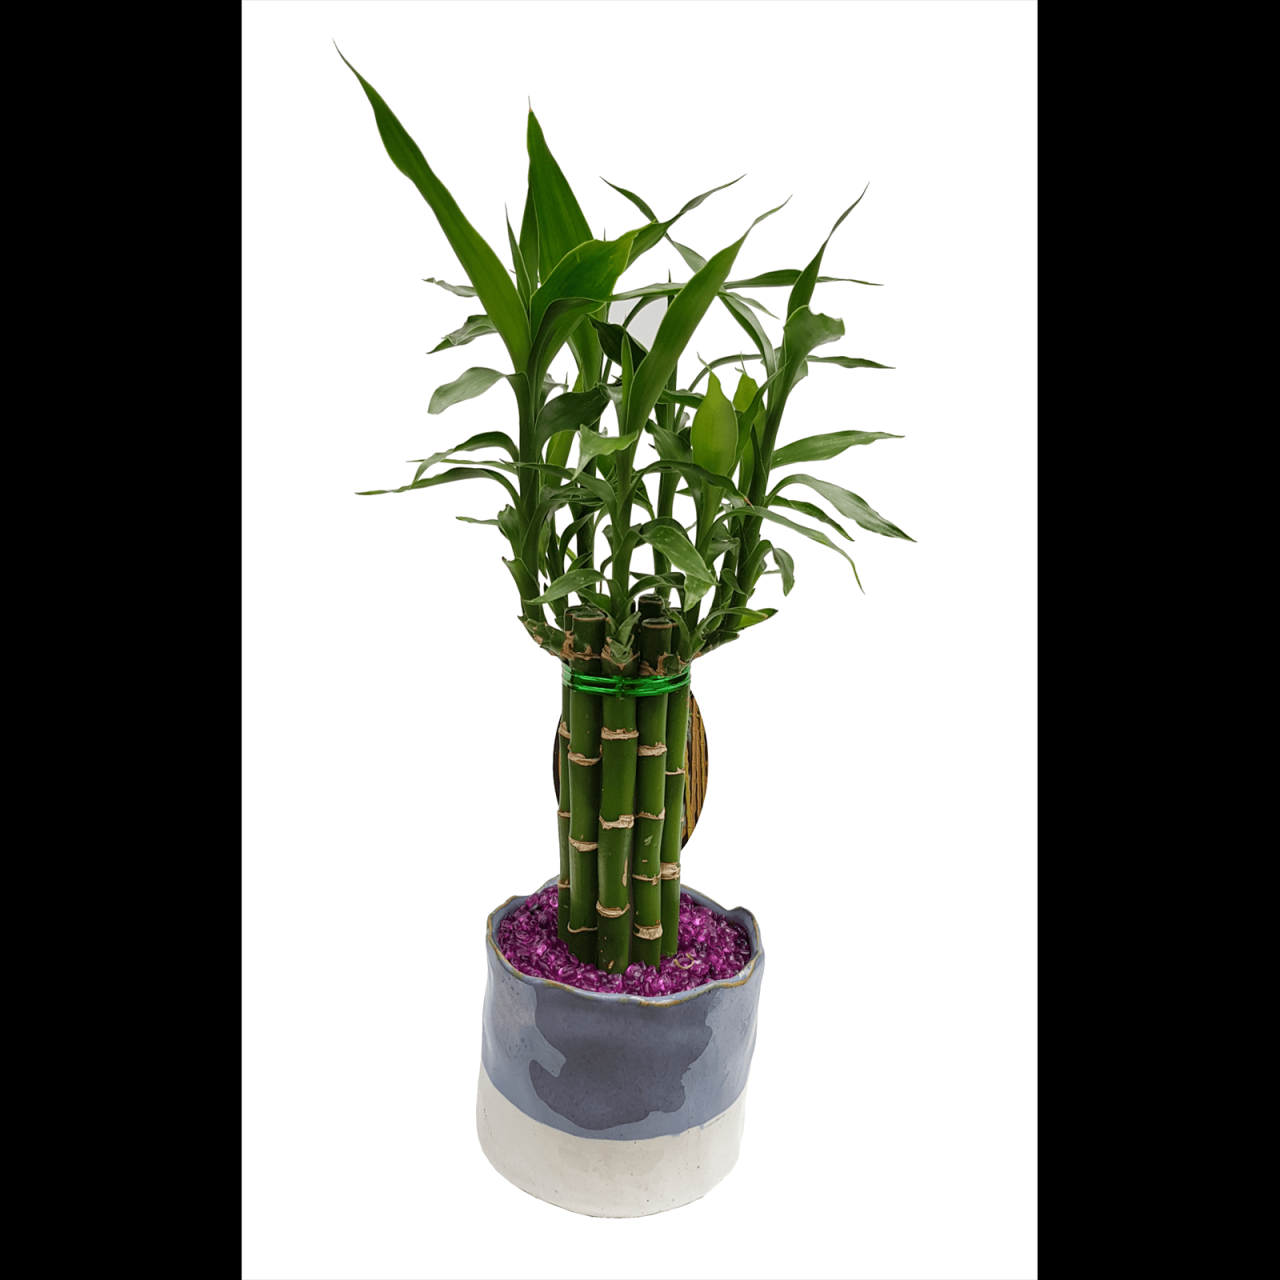 Hanging Plants Indoor | Bamboo Pot Plants from Bunnings: Enhance Your Home with Natural Elegance